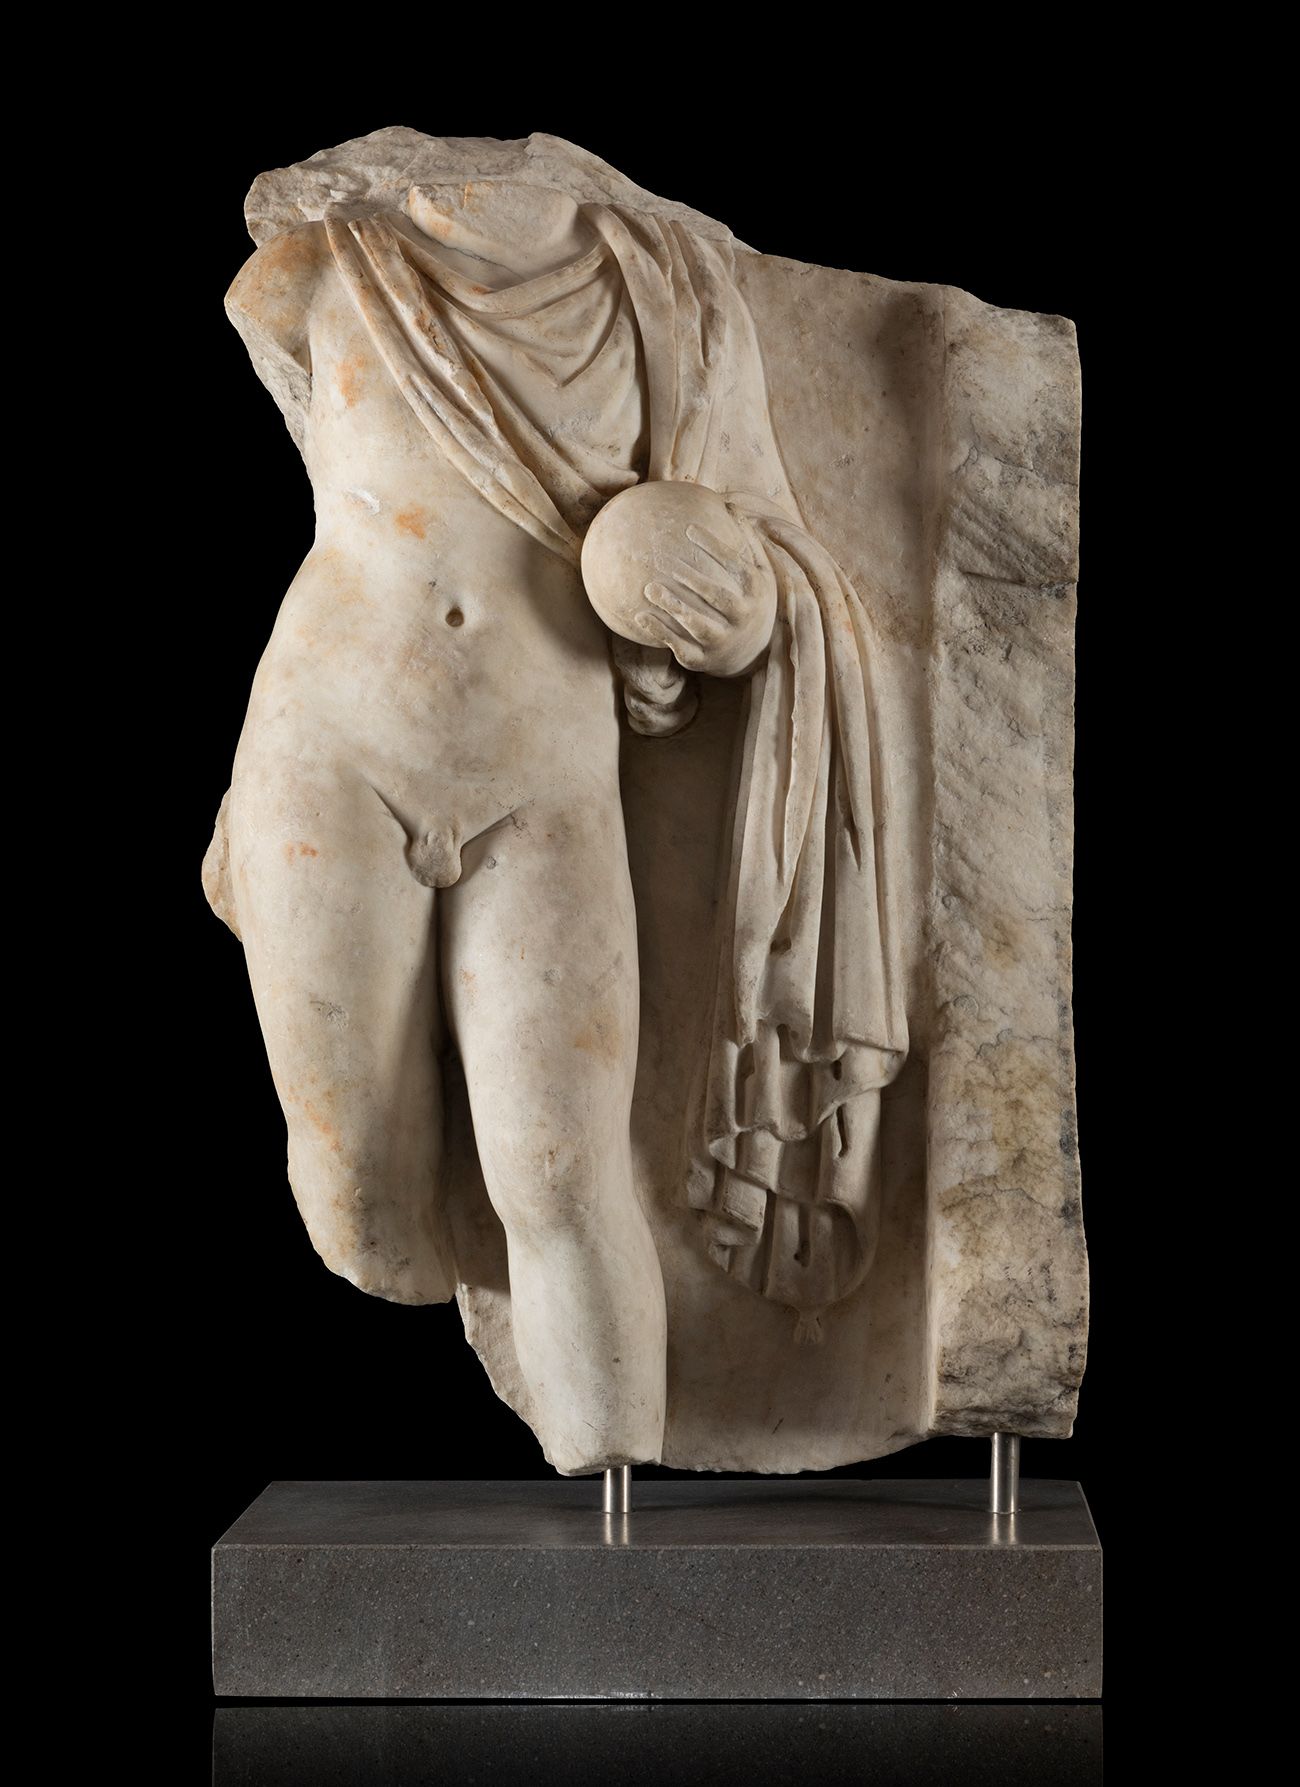 Null Prince with Orb. Imperial Rome, 1st century AD.
Marble.
From a discovery in&hellip;